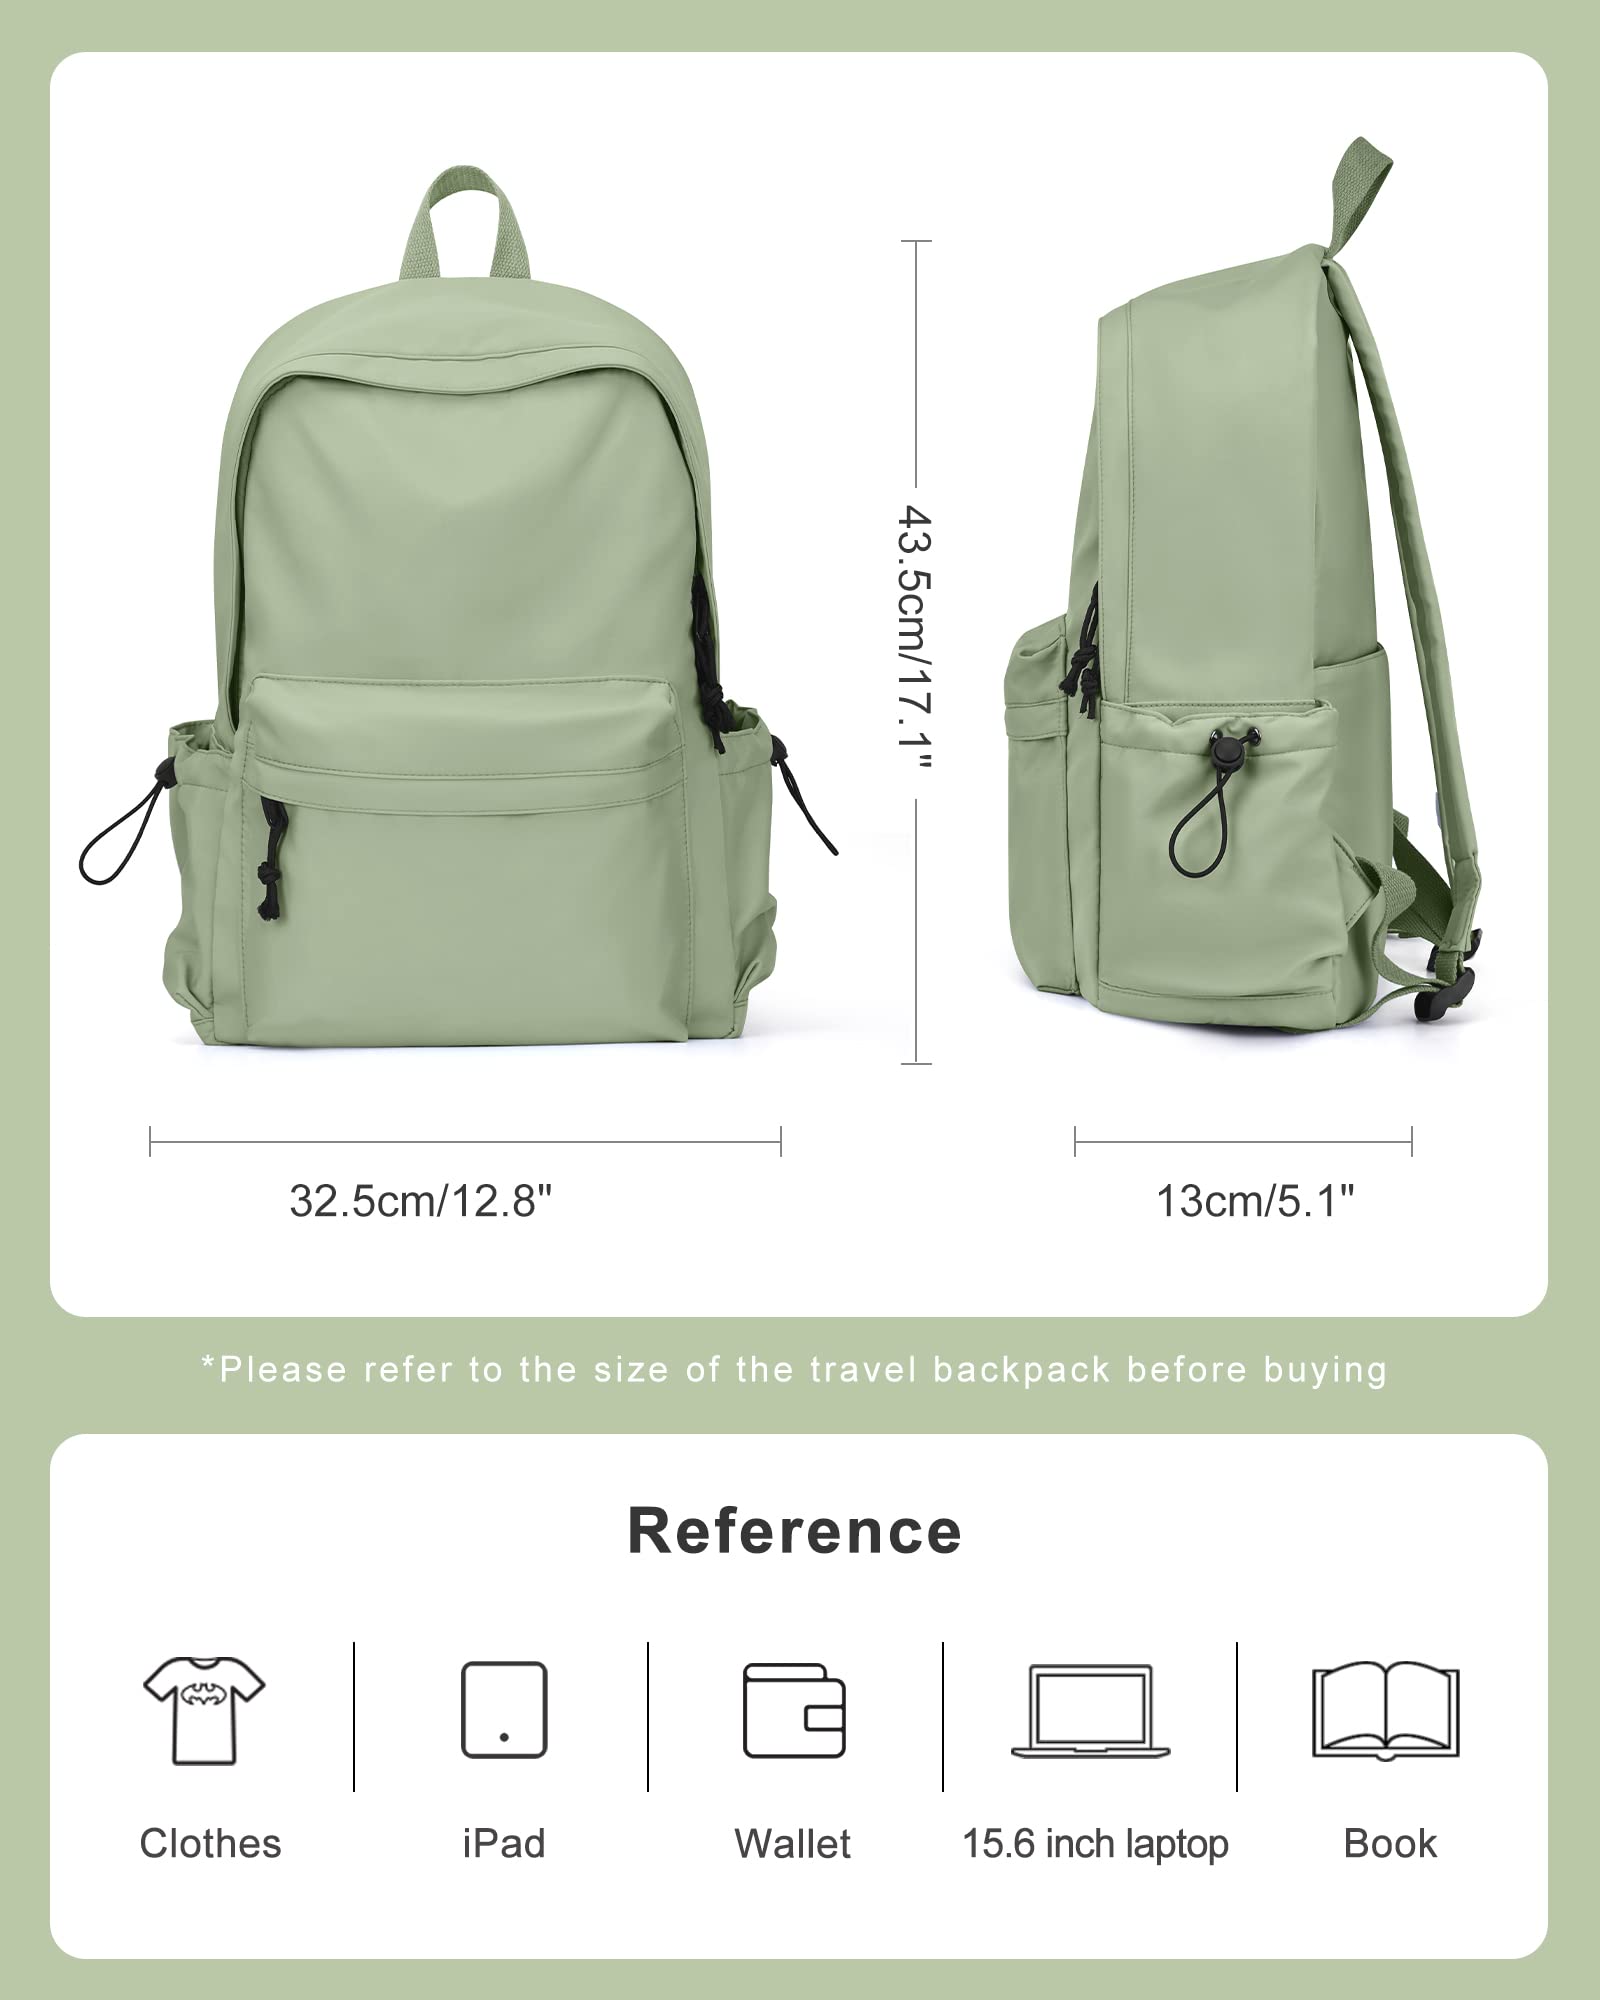 coofay Carry on Backpack For Women Men Small Waterproof College Gym Backpack Lightweight Travel Backpack Rucksack Casual Daypack Laptop Backpacks Aesthetic Backpack Green